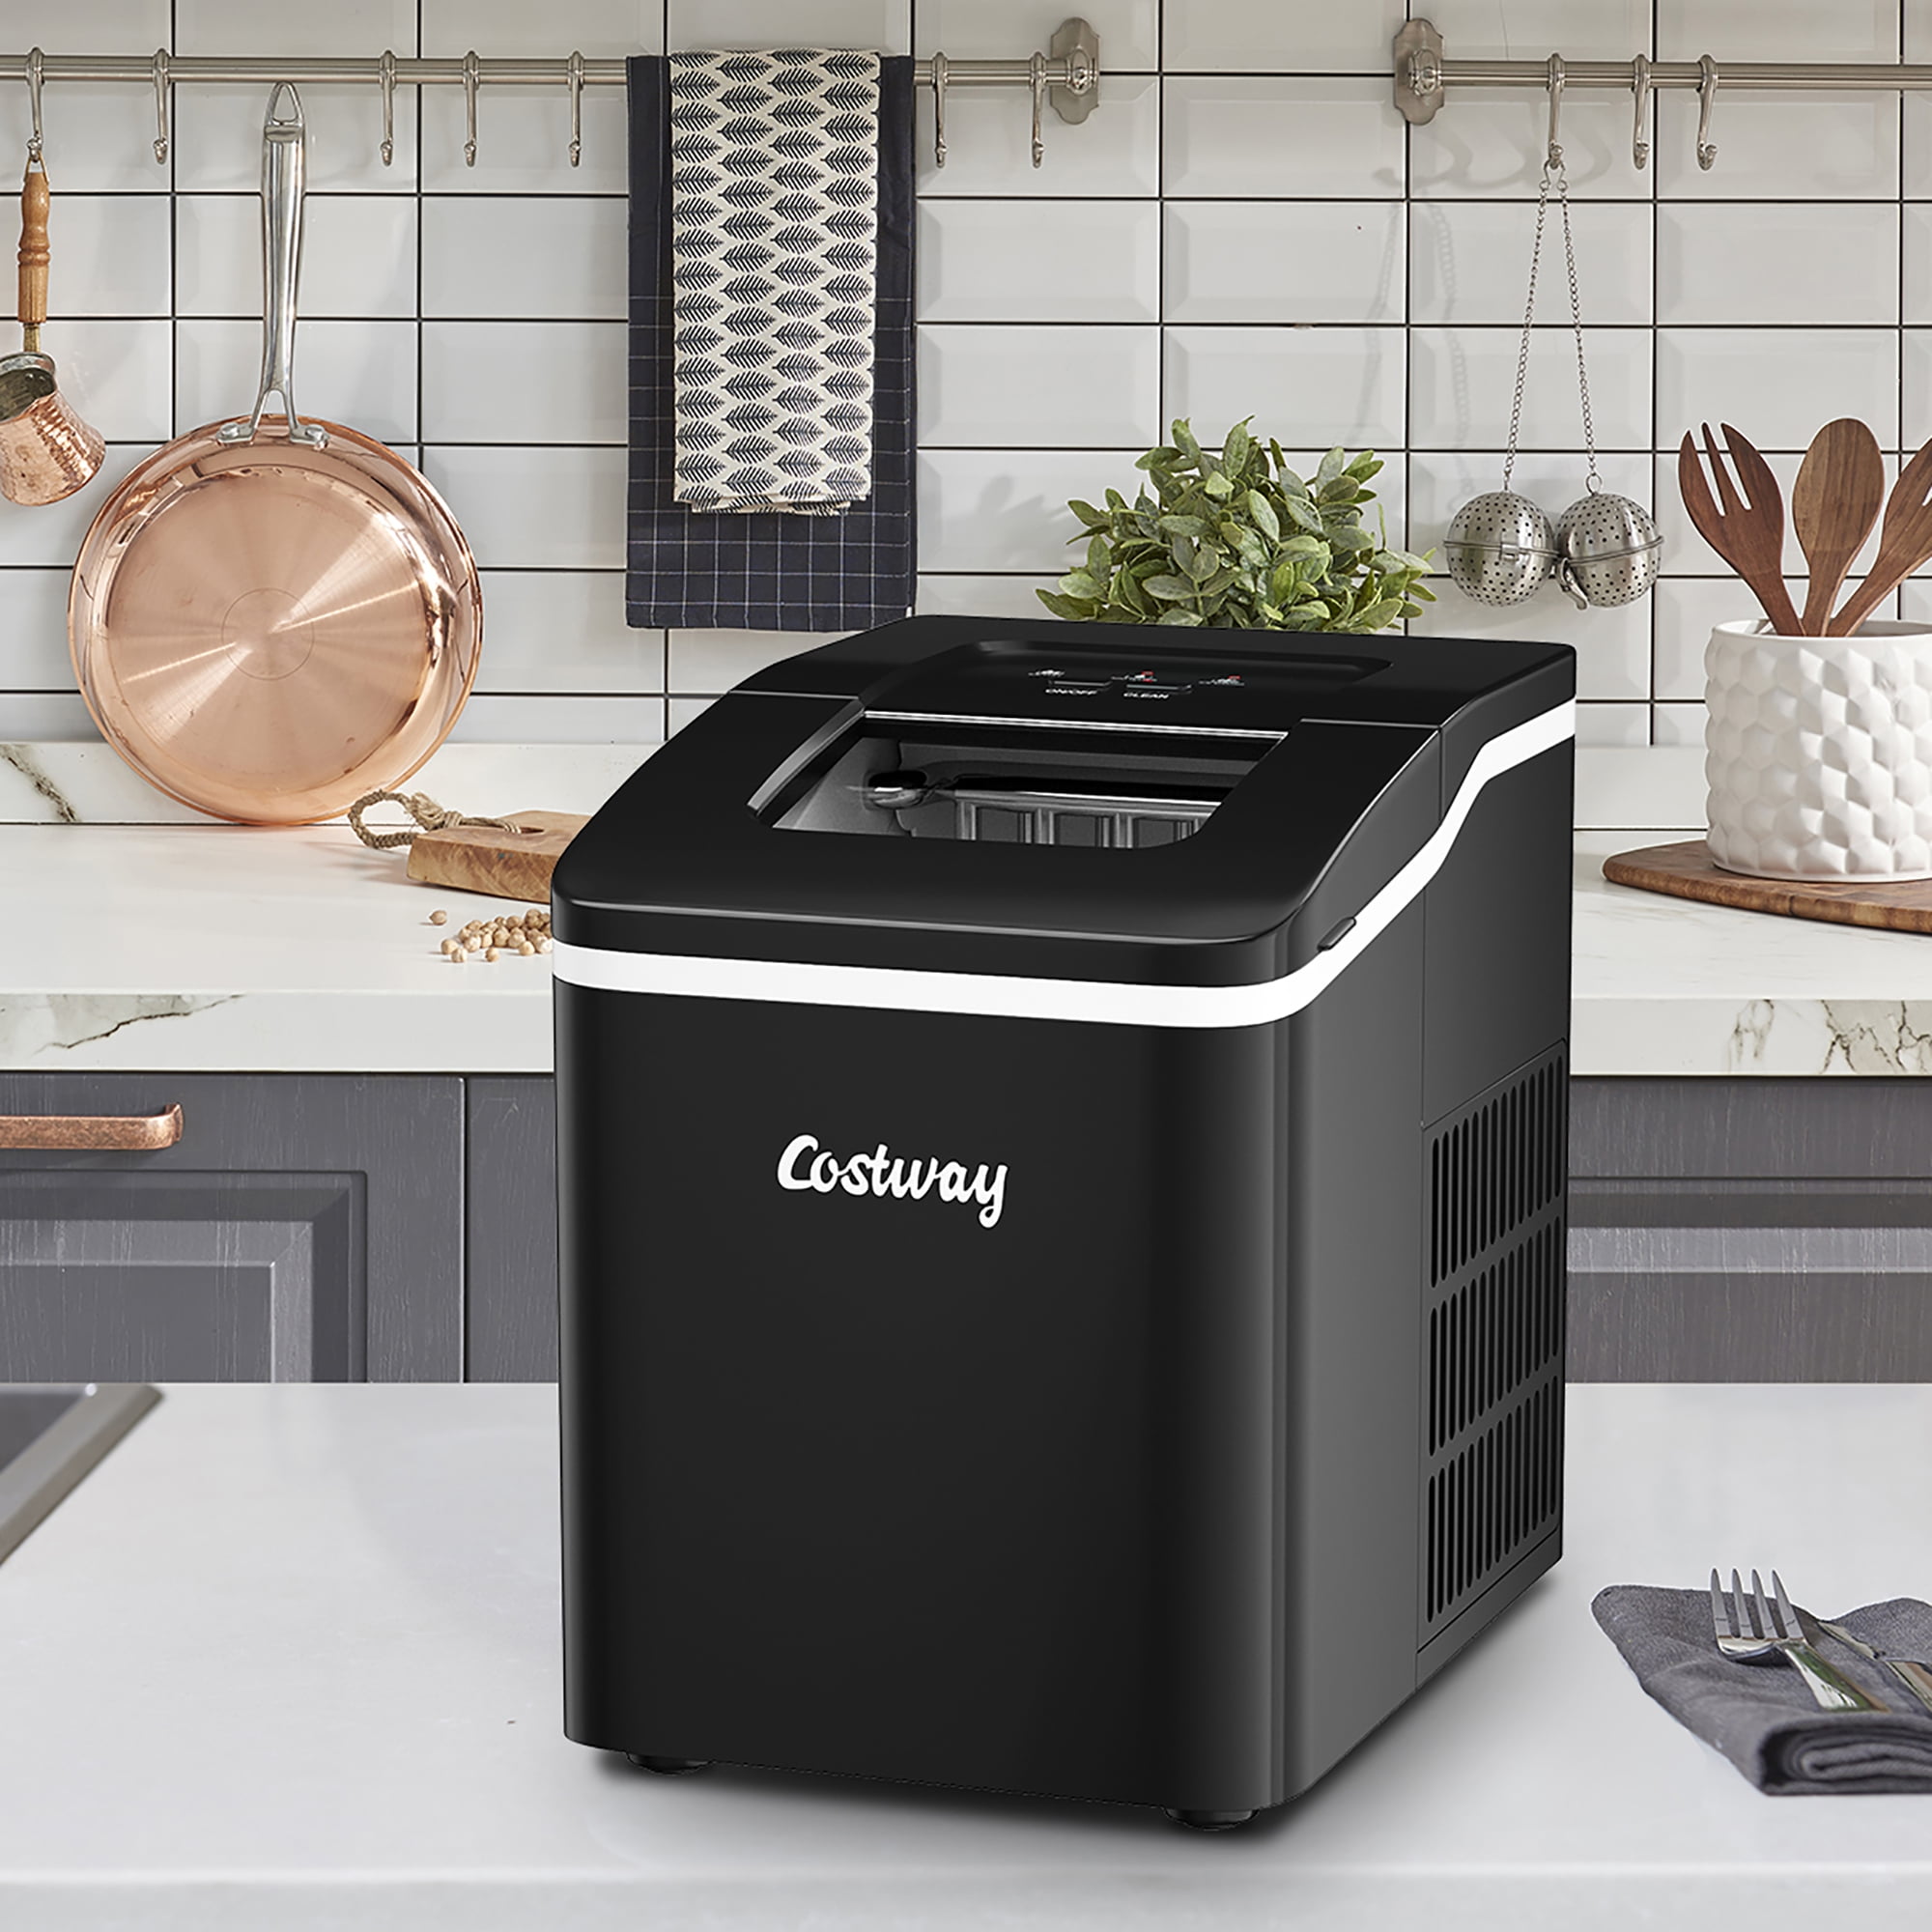 Costway Countertop Portable Ice Maker 26.5 lbs./Day Self-Cleaning Machine  with Flip Lid Black ES10200US-BK - The Home Depot